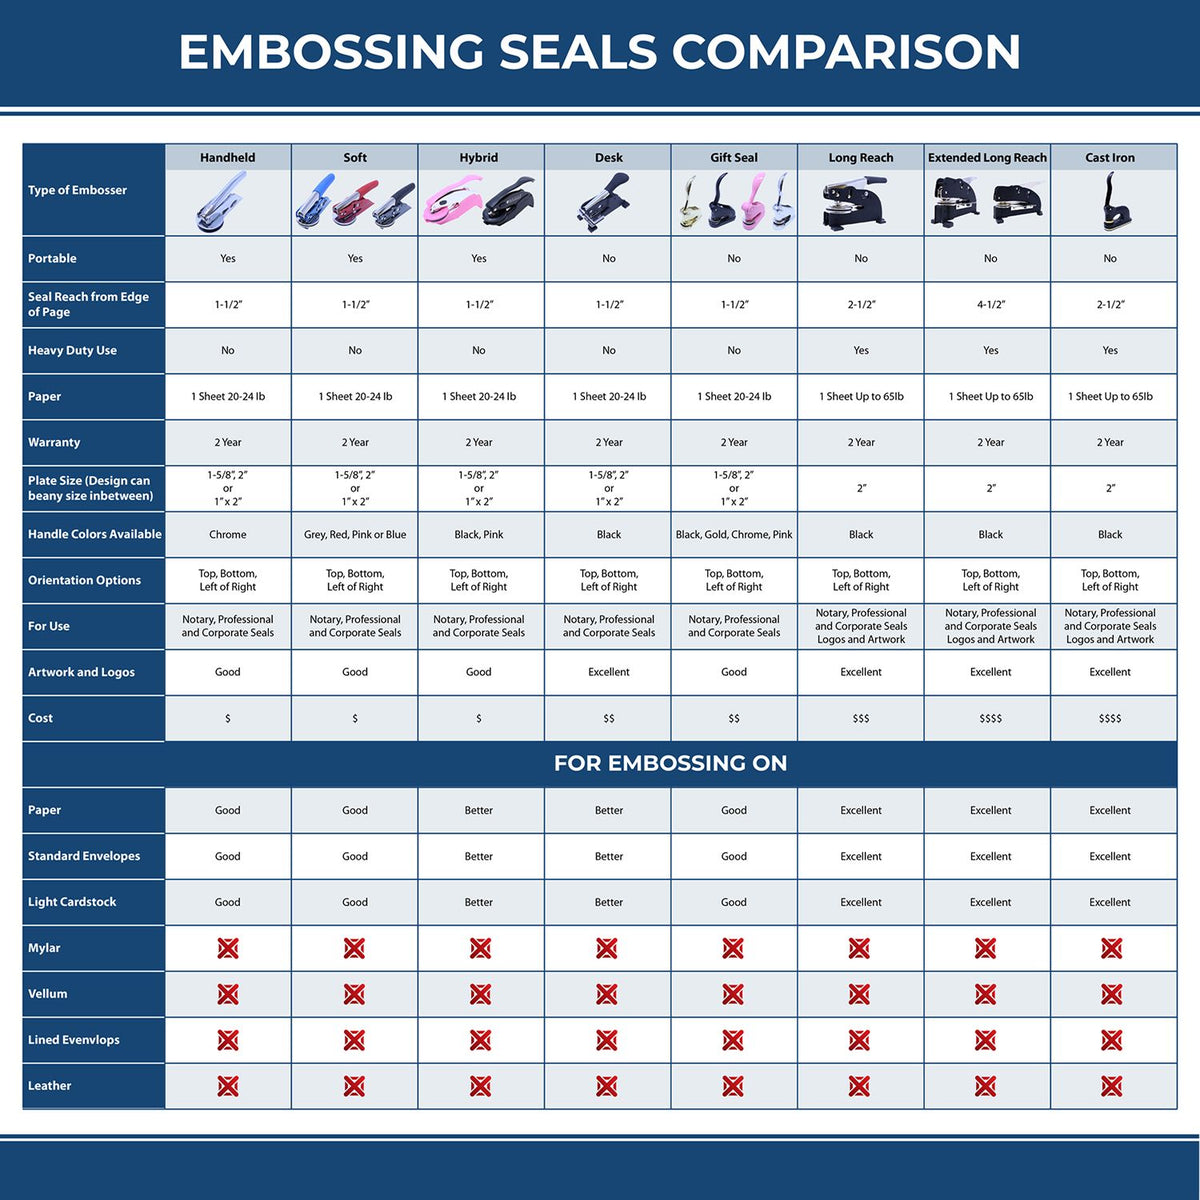 A comparison chart for the different types of mount models available for the State of Utah Long Reach Architectural Embossing Seal.